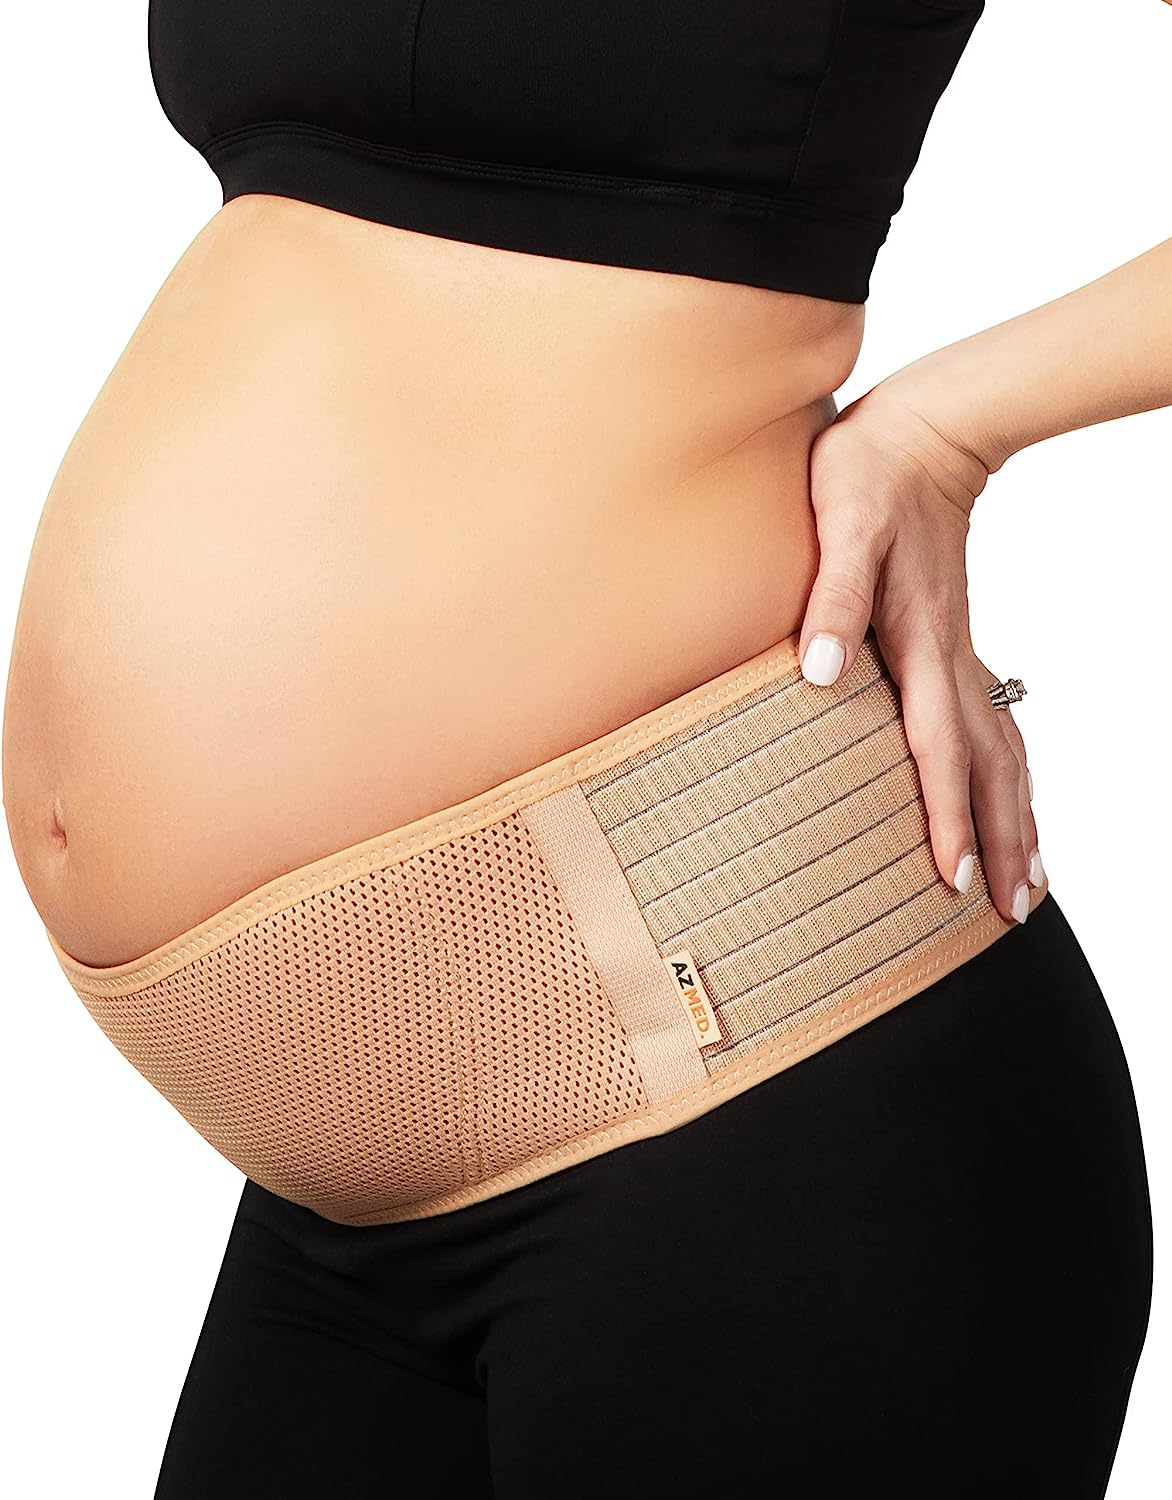 azmed pregnancy belt breathable abdominal belt back support top 40 christmas gift for expecting wife